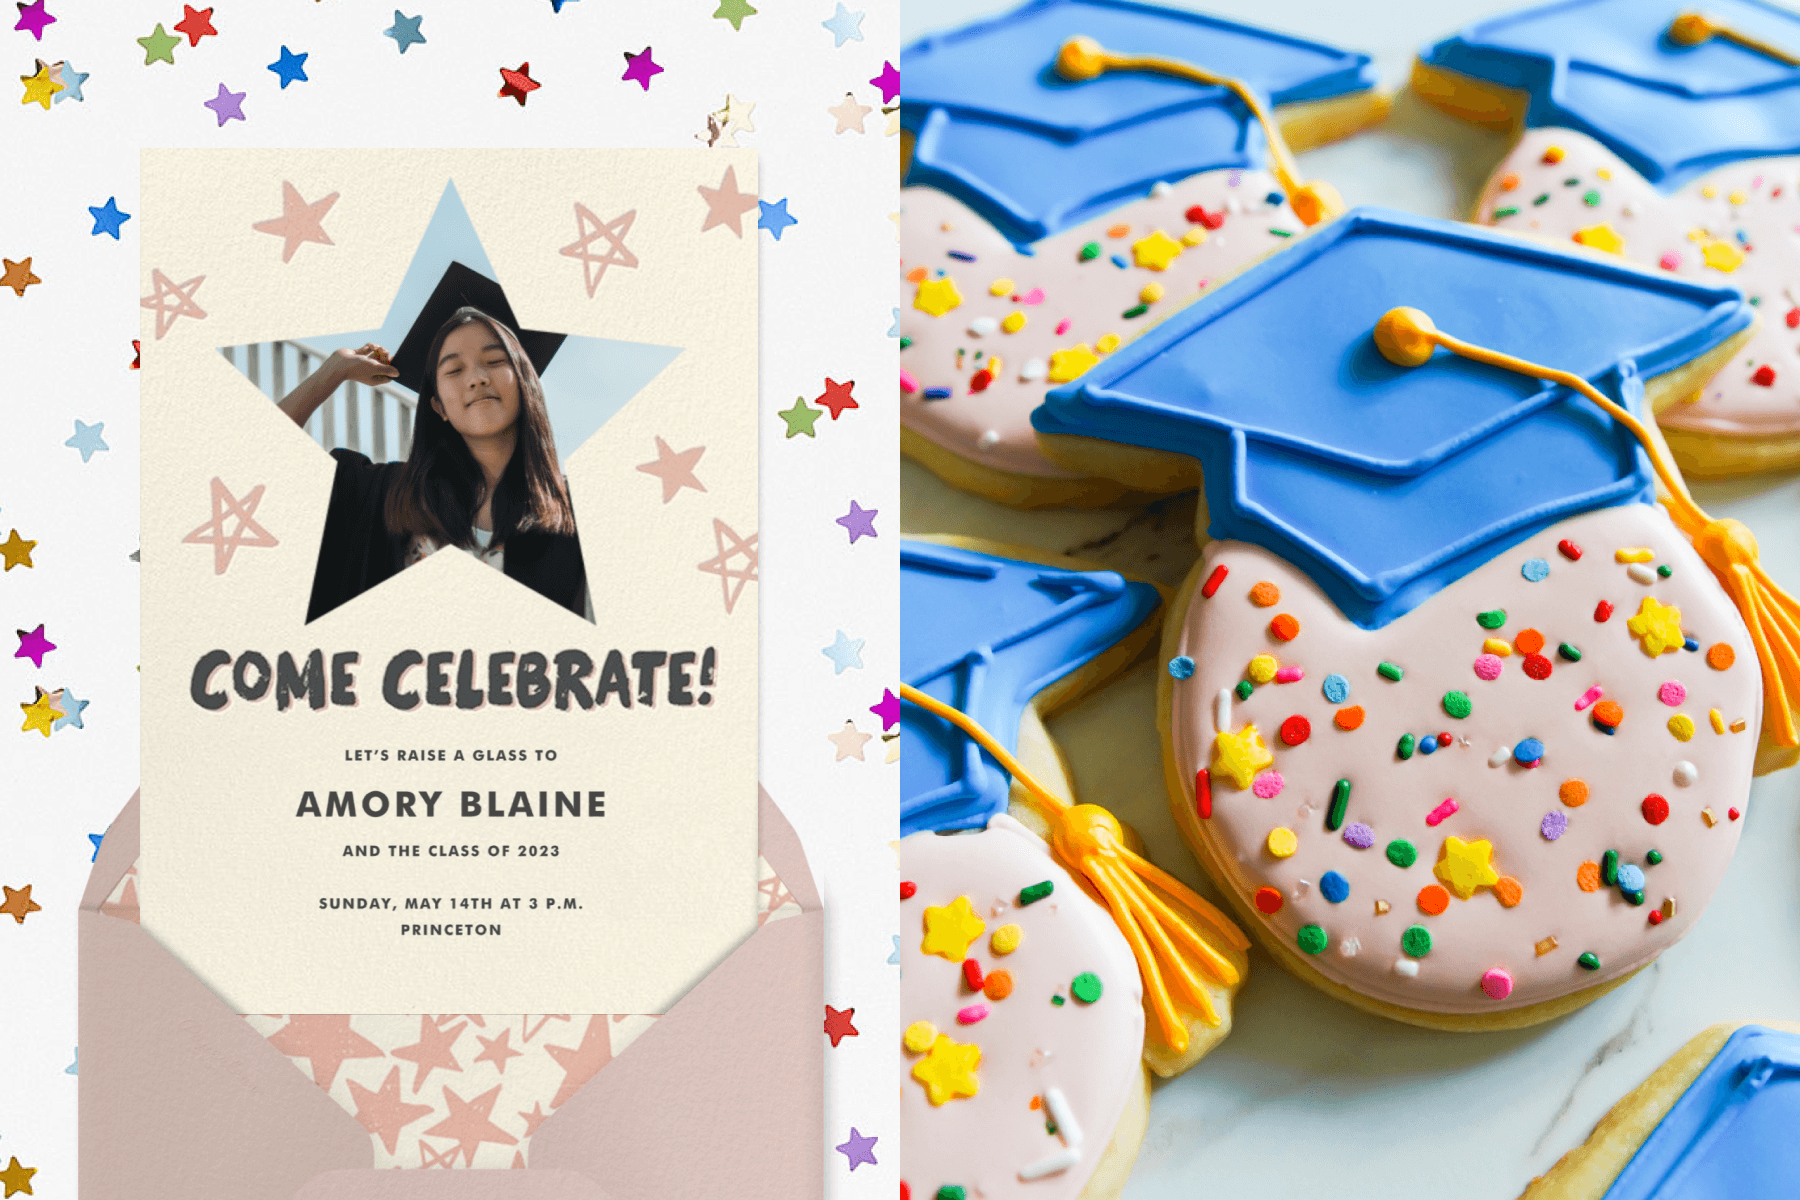 left: A graduation party invitation with a star-shaped photo of a young woman in a graduation outfit and pin star doodles around her on a backdrop of rainbow star confetti. Right: Pink frosted cookies with rainbow sprinkles and blue mortarboard hats.